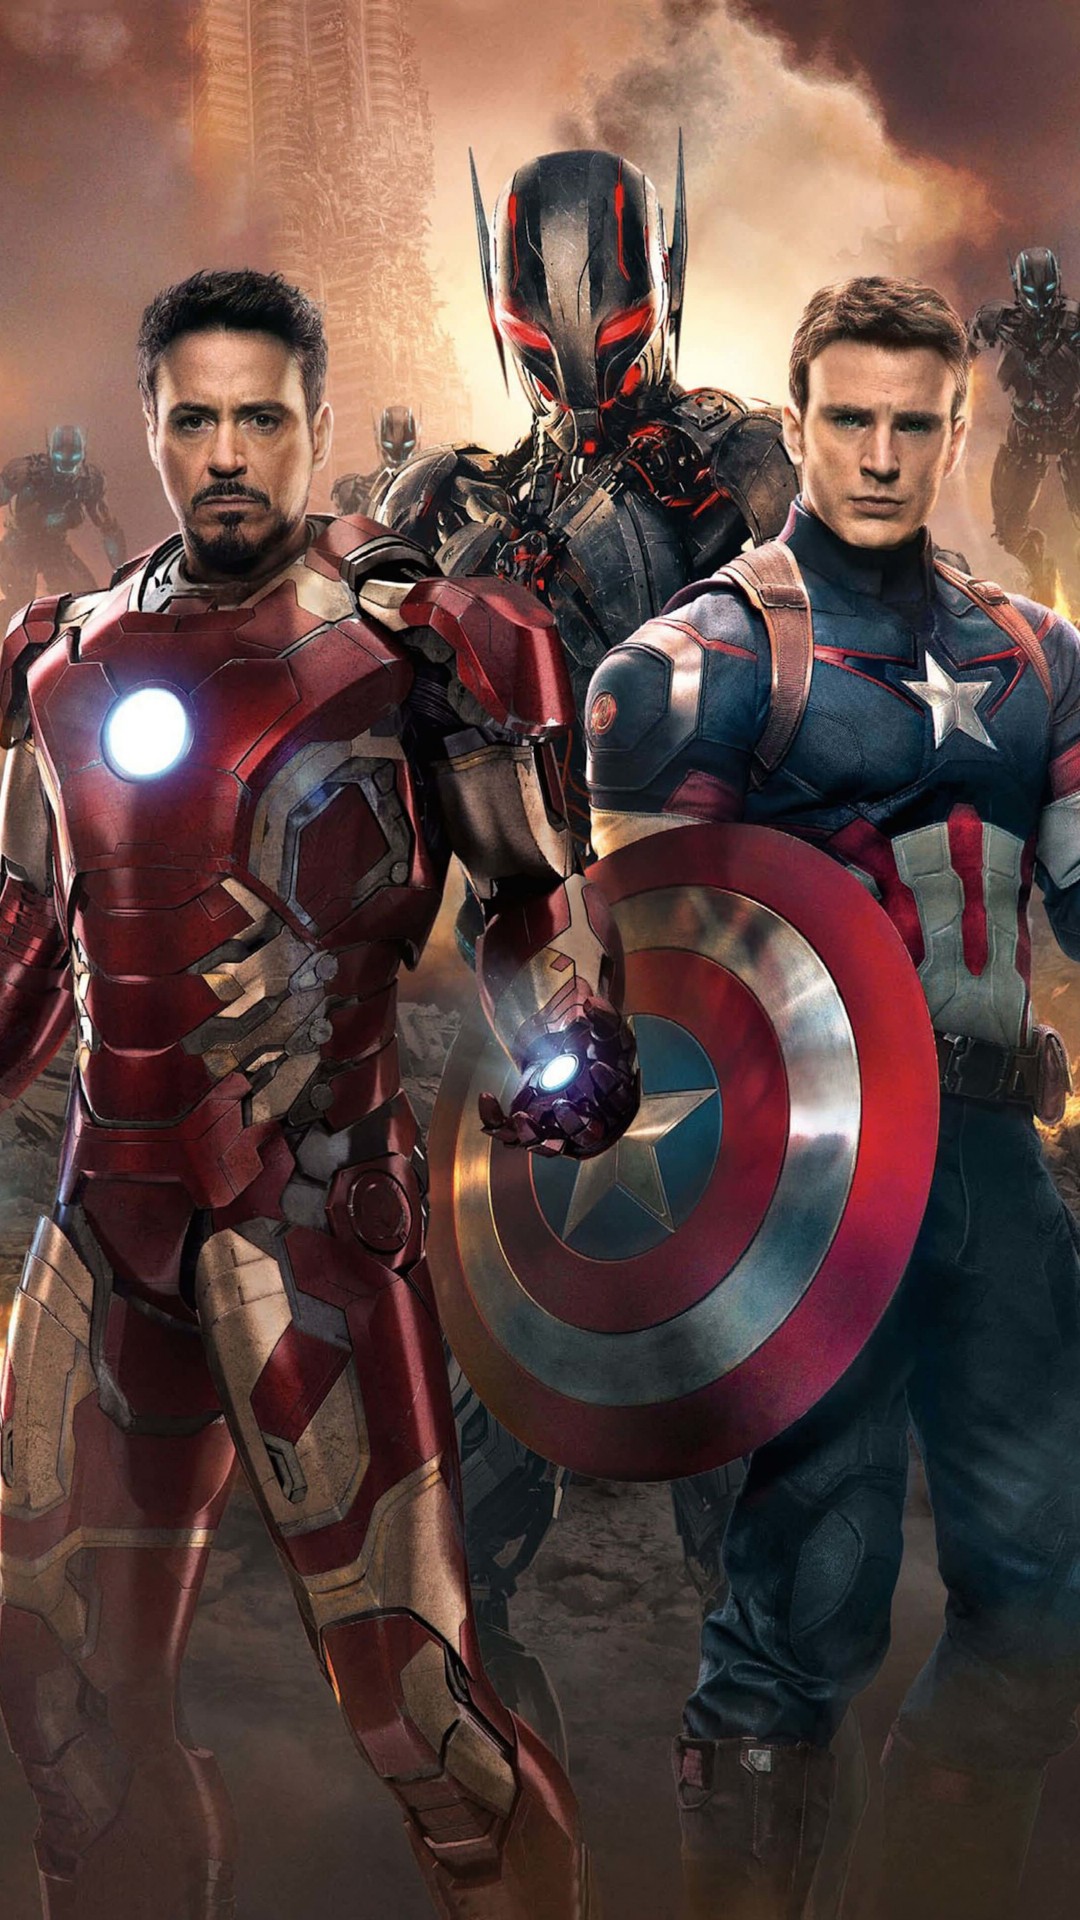 The Avengers: Age of Ultron - Iron Man and Captain America Wallpaper for LG G2